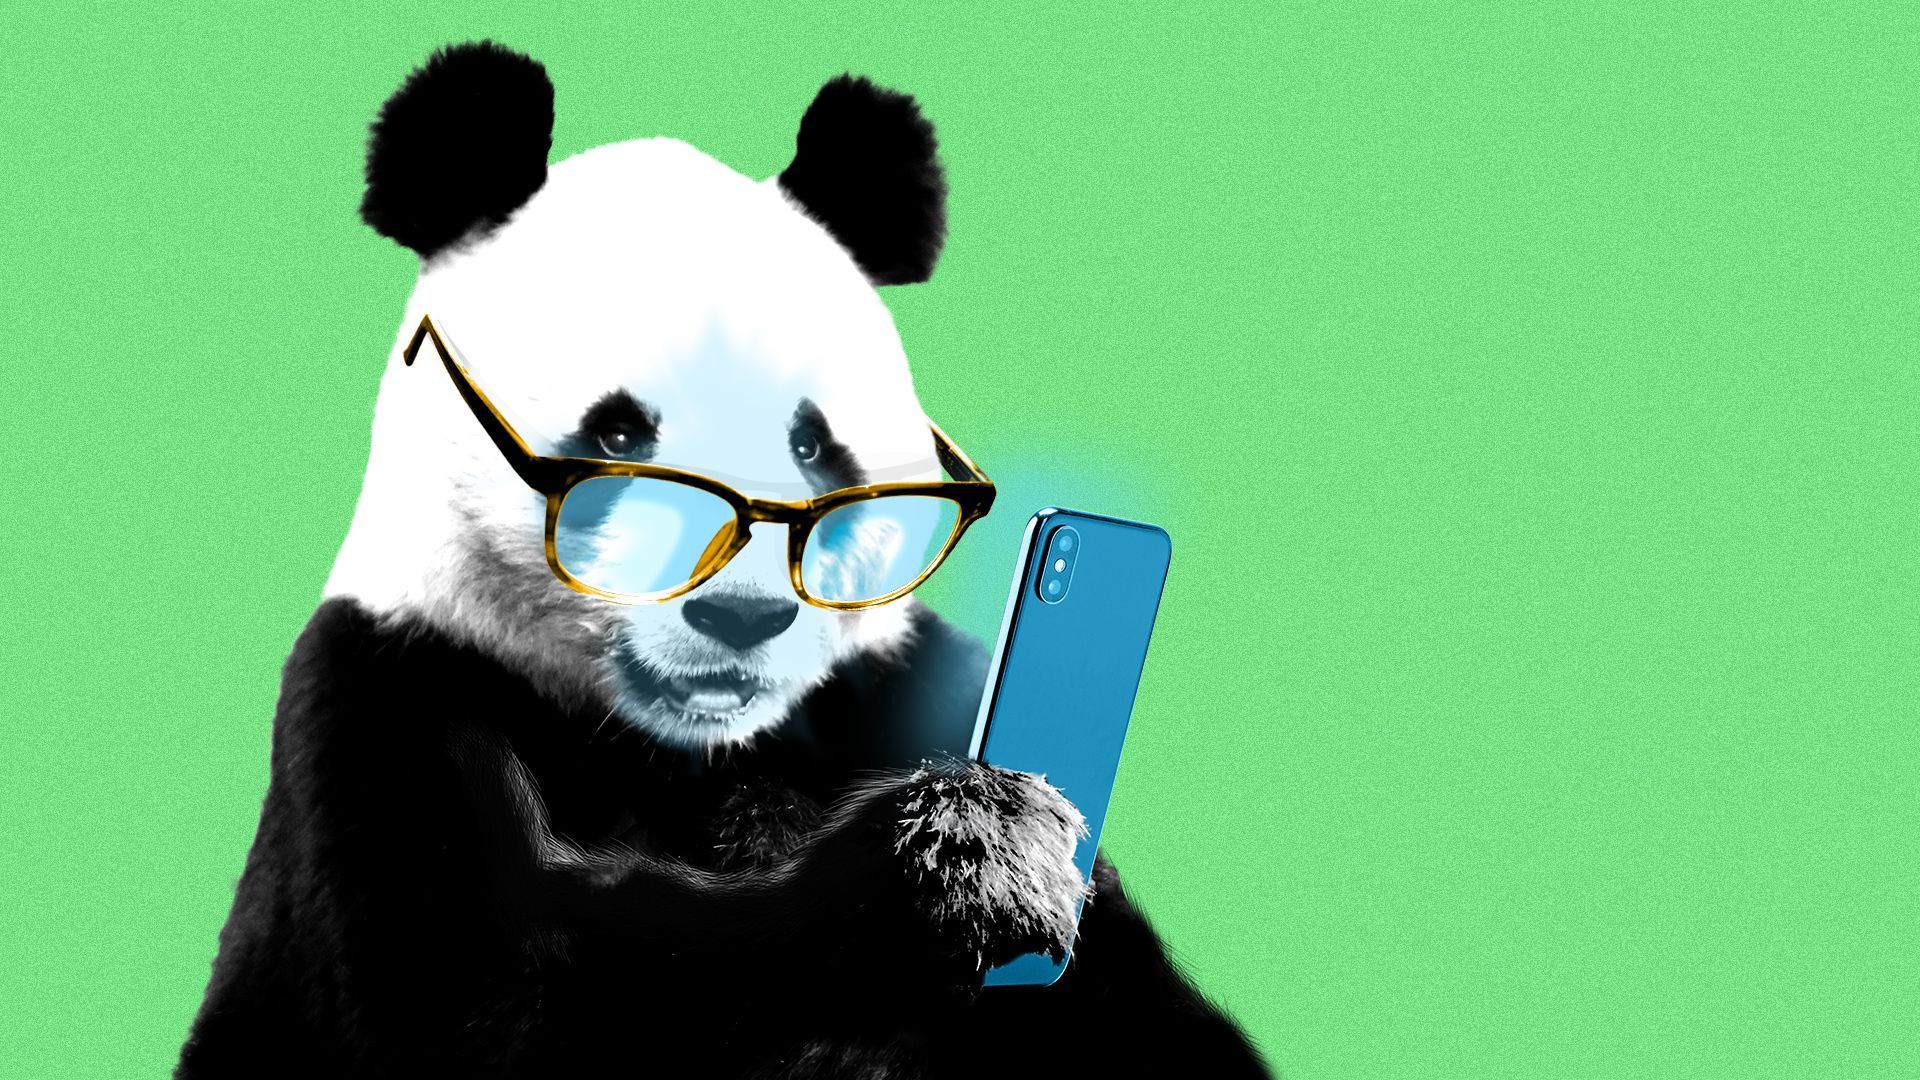 Illustration of a giant panda wearing glasses and looking at a smartphone.